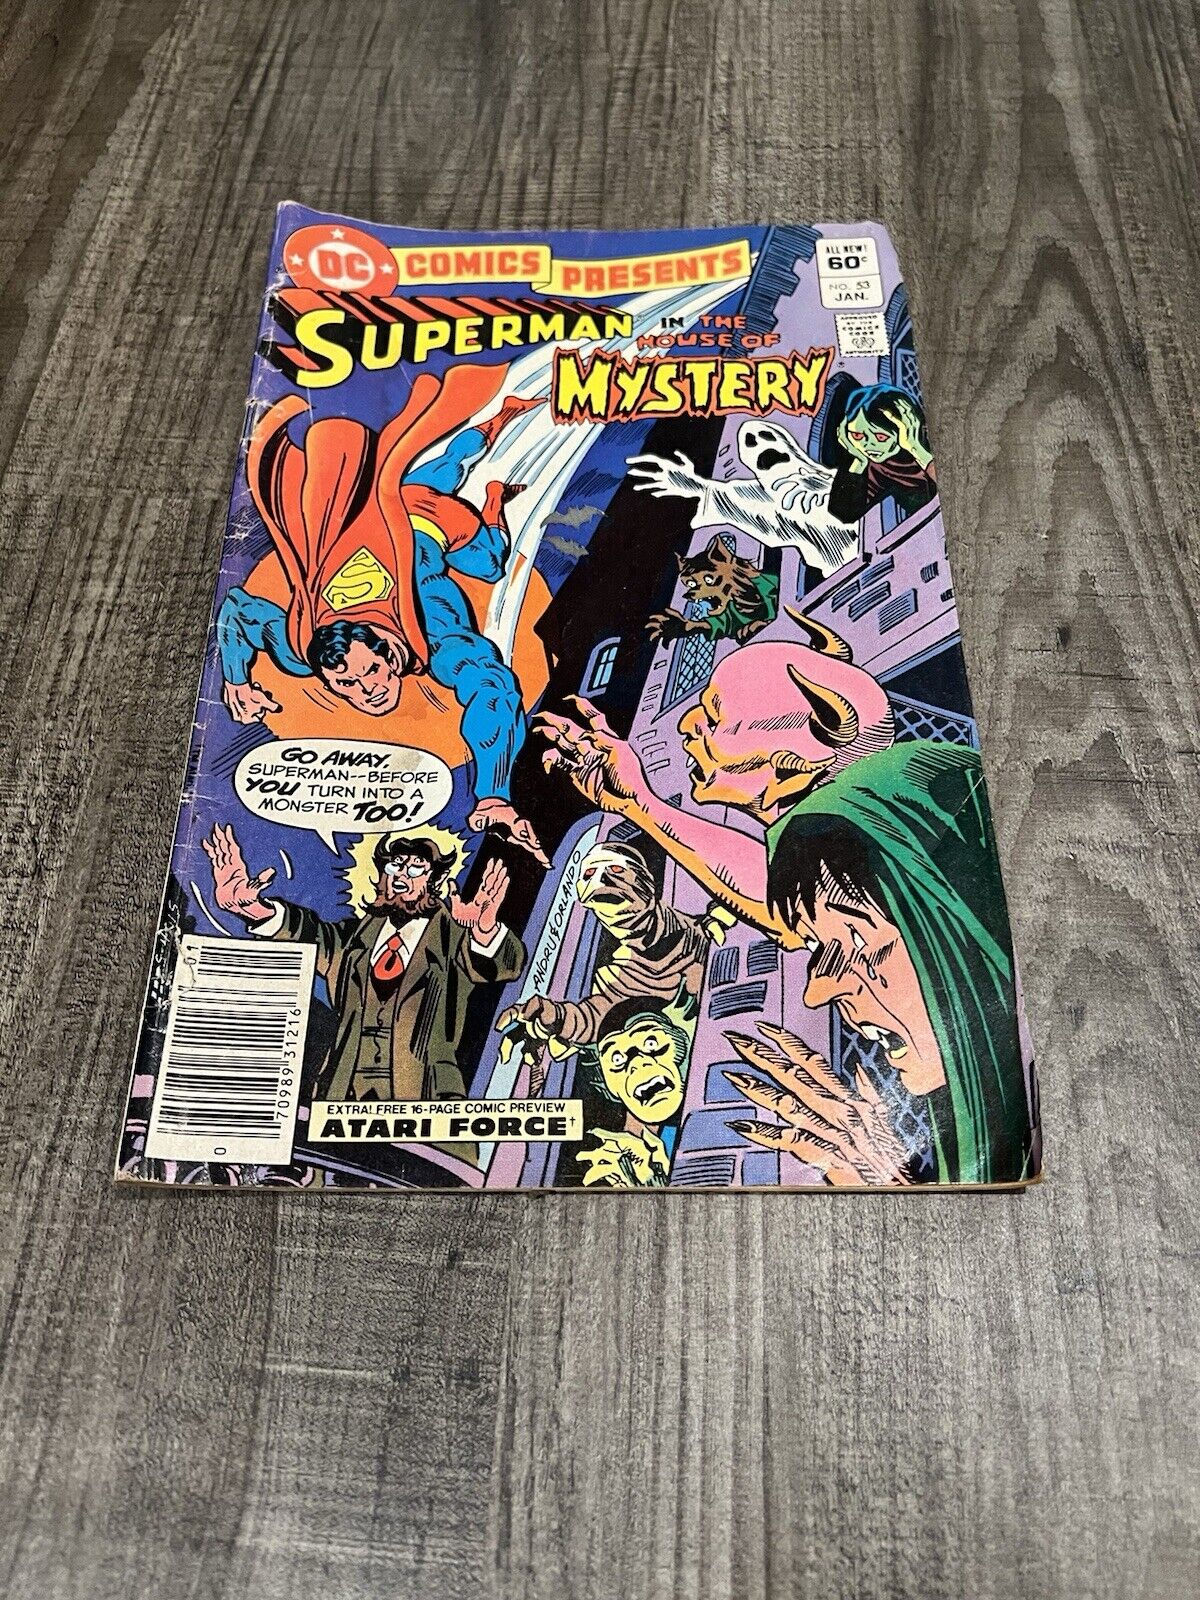 DC Comics Presents #53 Superman In The House Of Mystery 1983